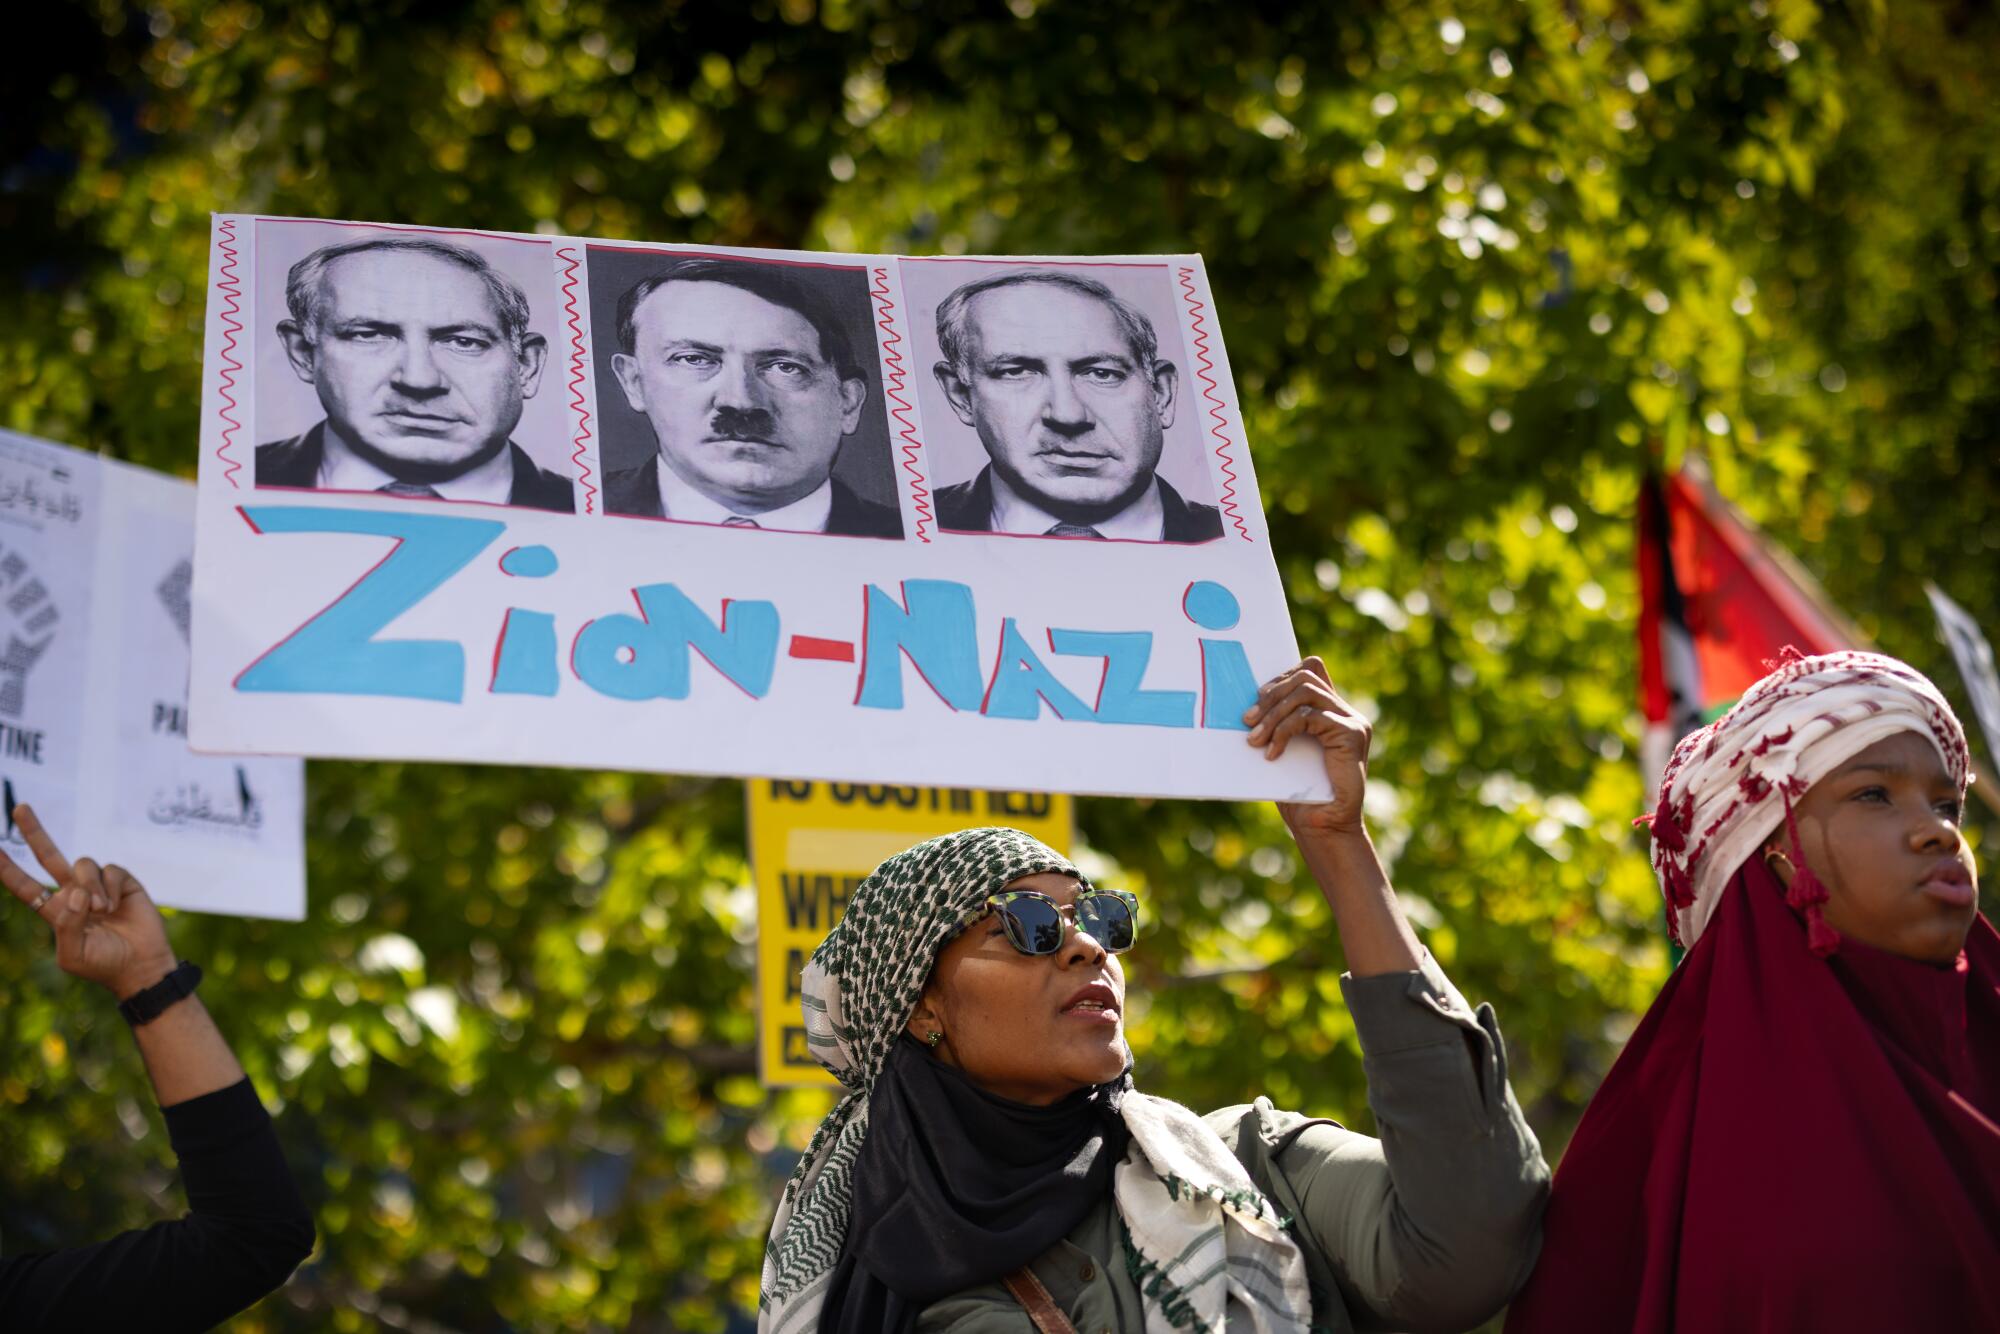 A woman holds up a sign with images of Hitler and Israel's Benjamin Netanyahu.